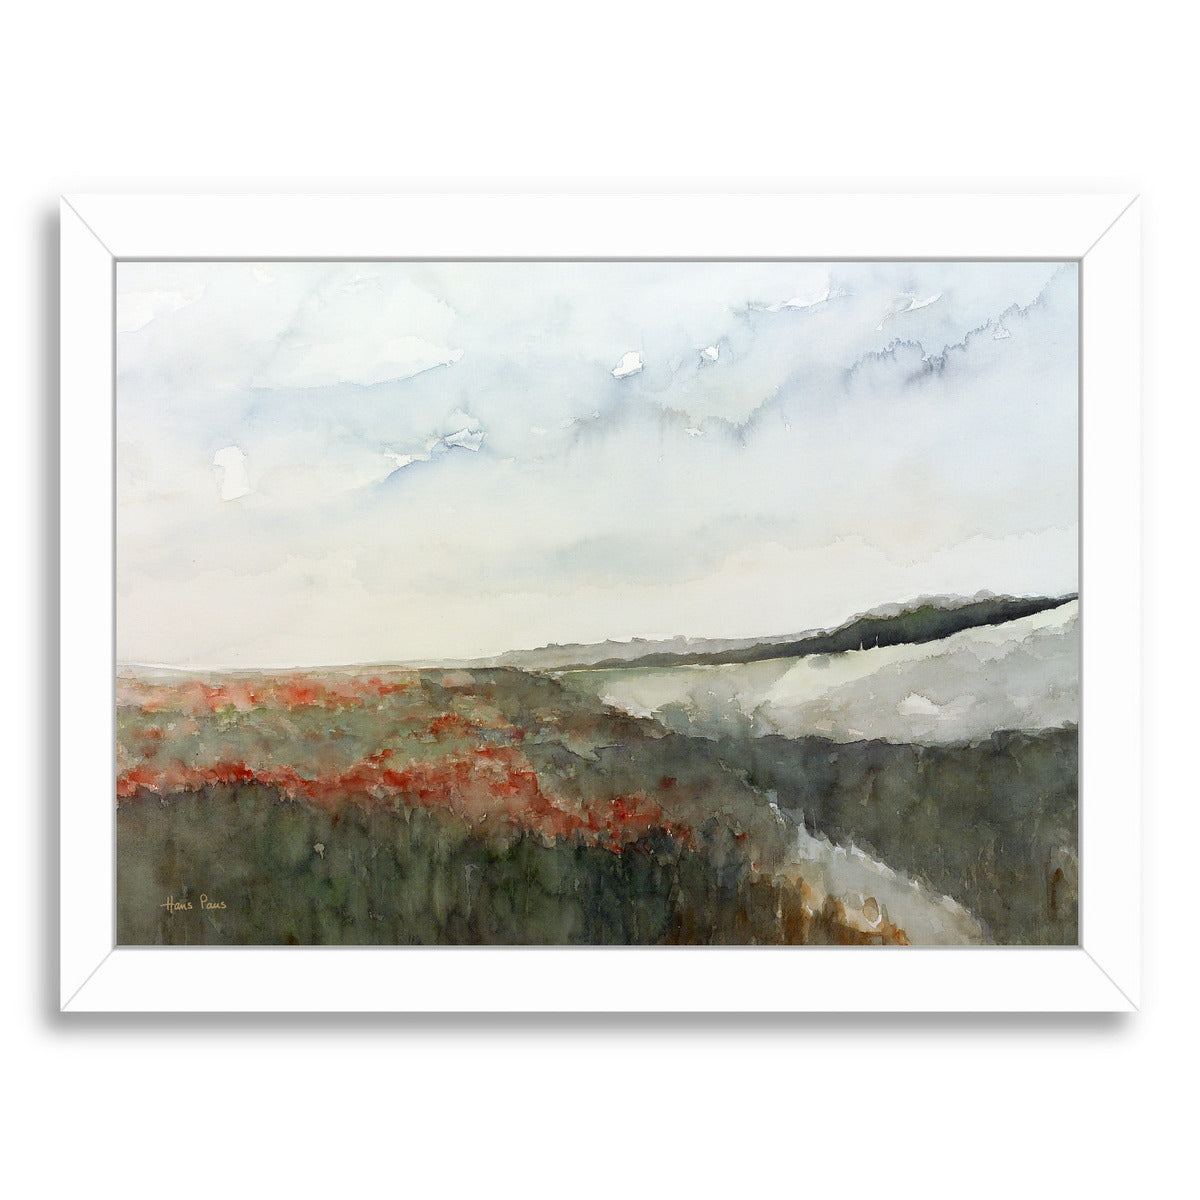 Red Flowers 2 By Hans Paus - White Framed Print - Wall Art - Americanflat